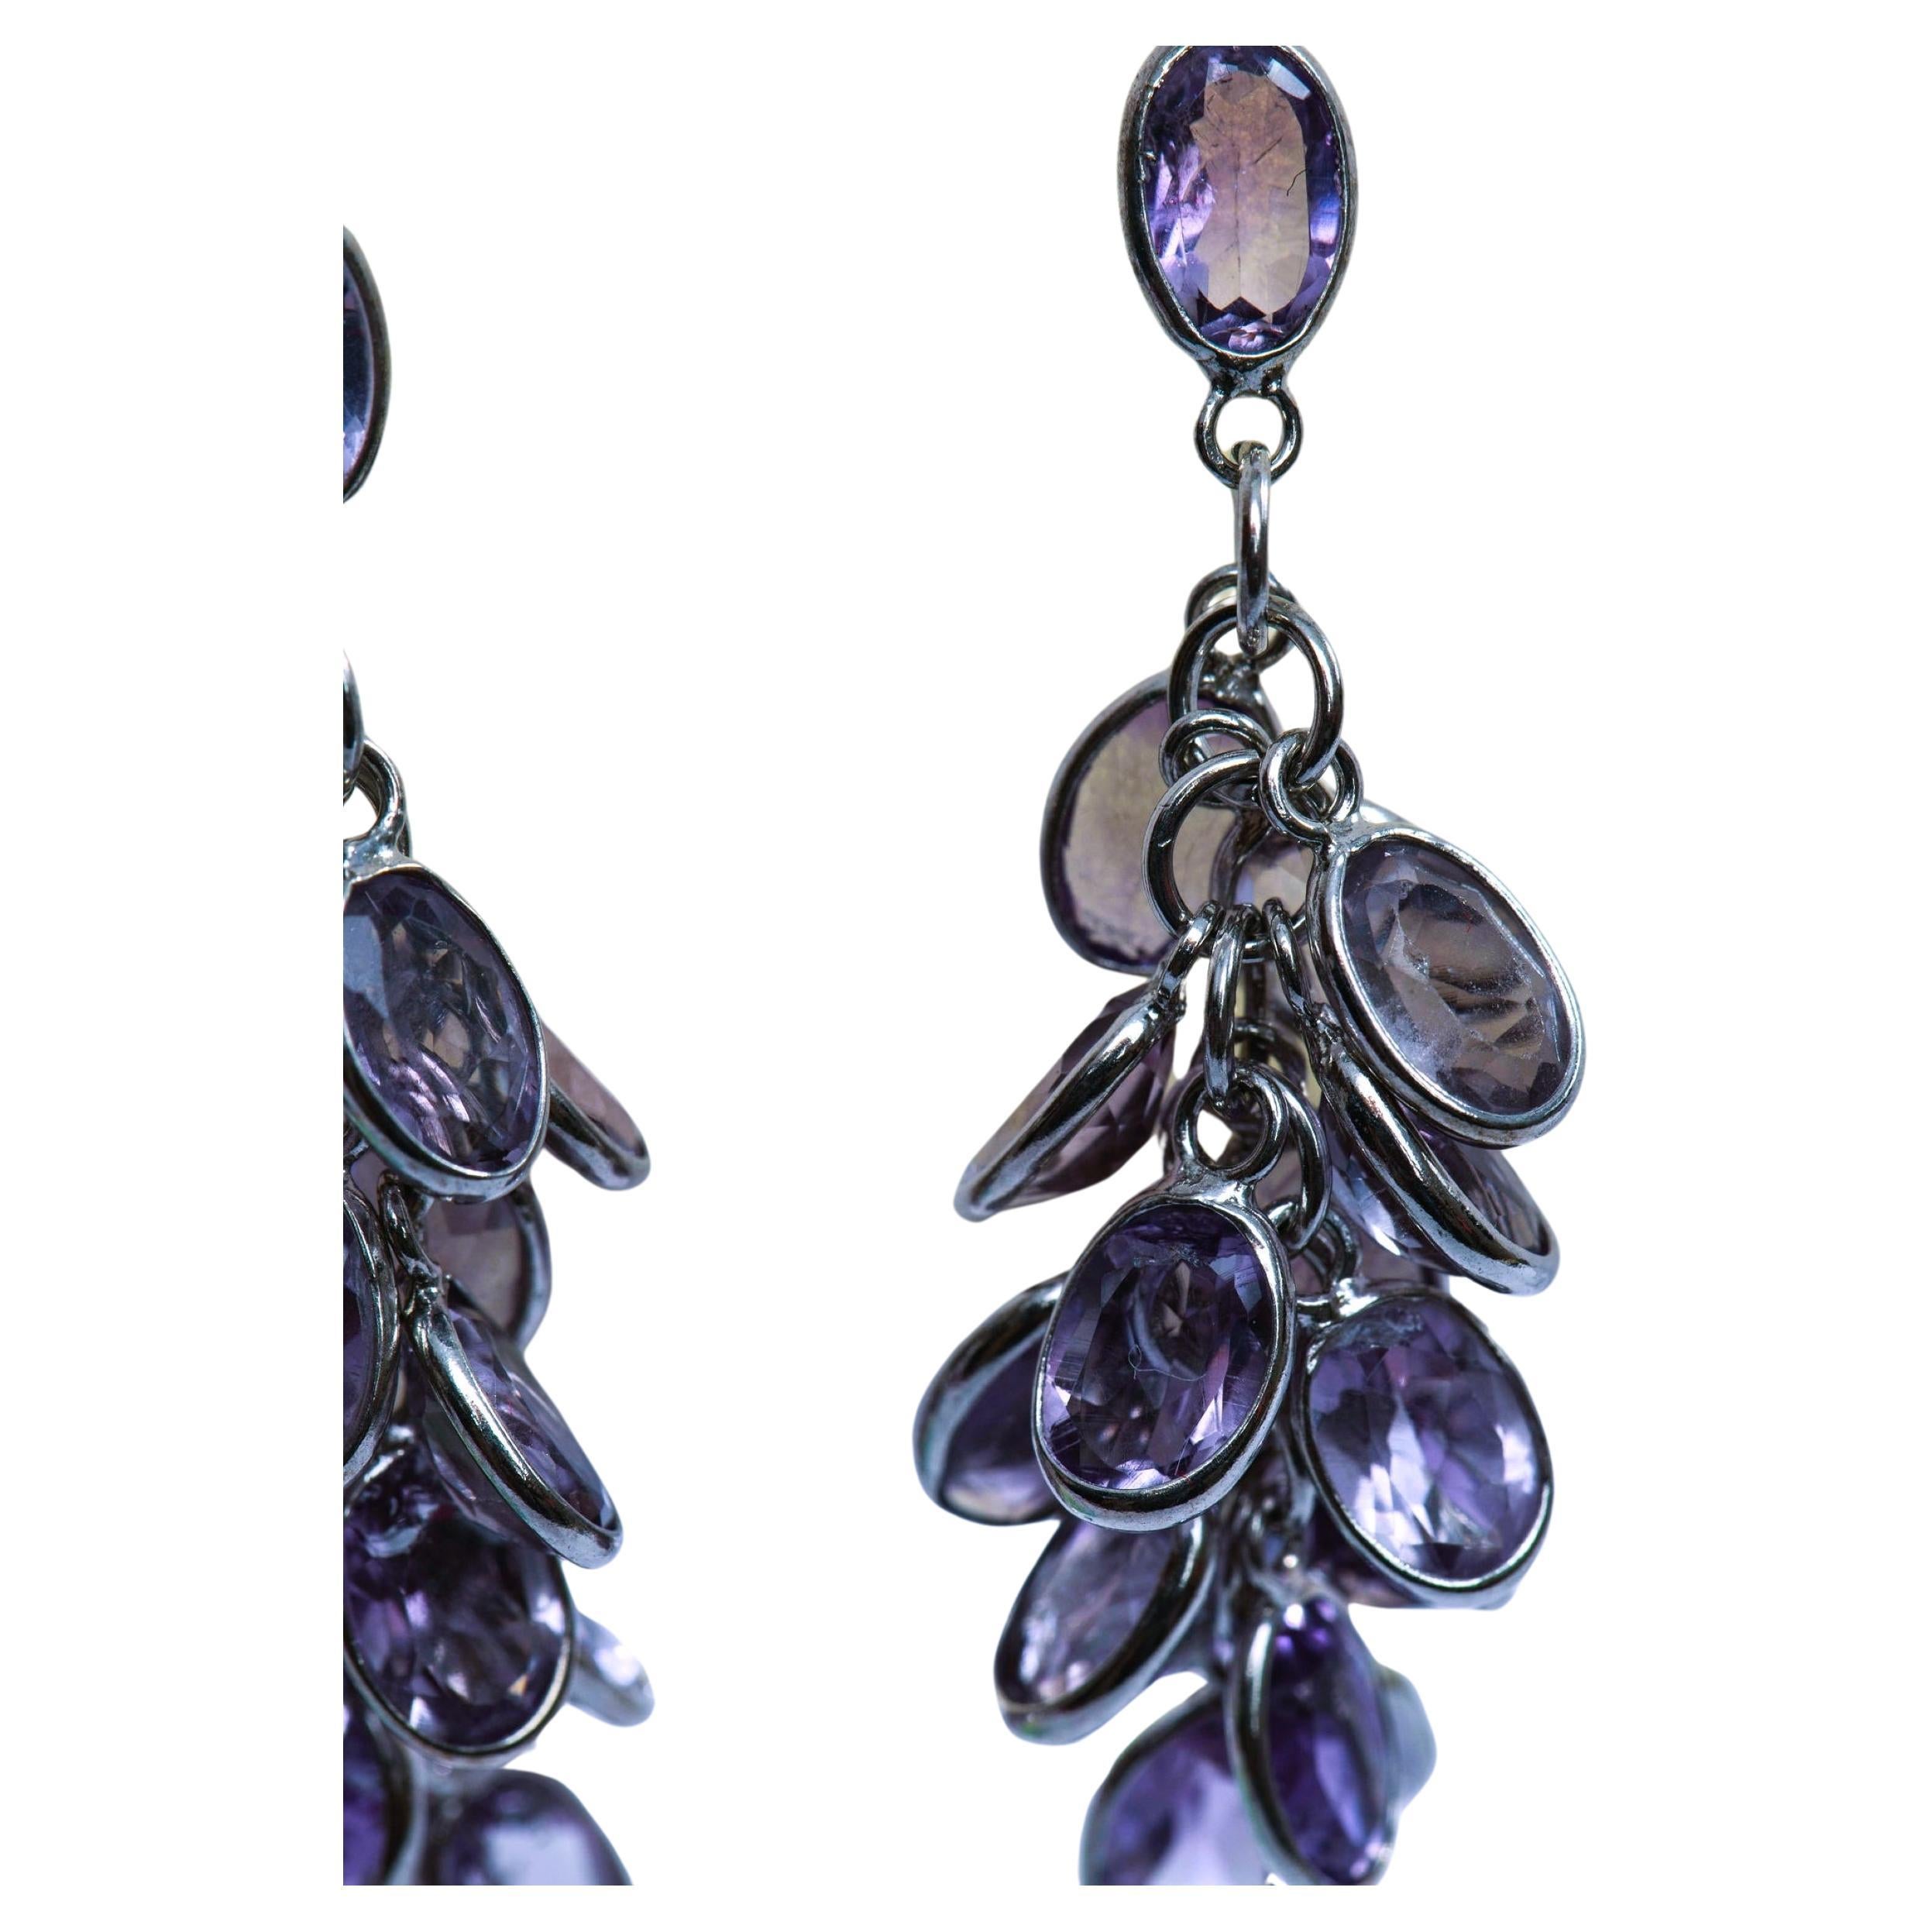 Make a statement with these stunning 10x oval, 1x round and 1x pear shape natural amethyst cluster earrings. Each earring features a cluster of sparkling amethyst gemstones, handpicked for their stunning color and quality. 
Measurements:
Amethyst